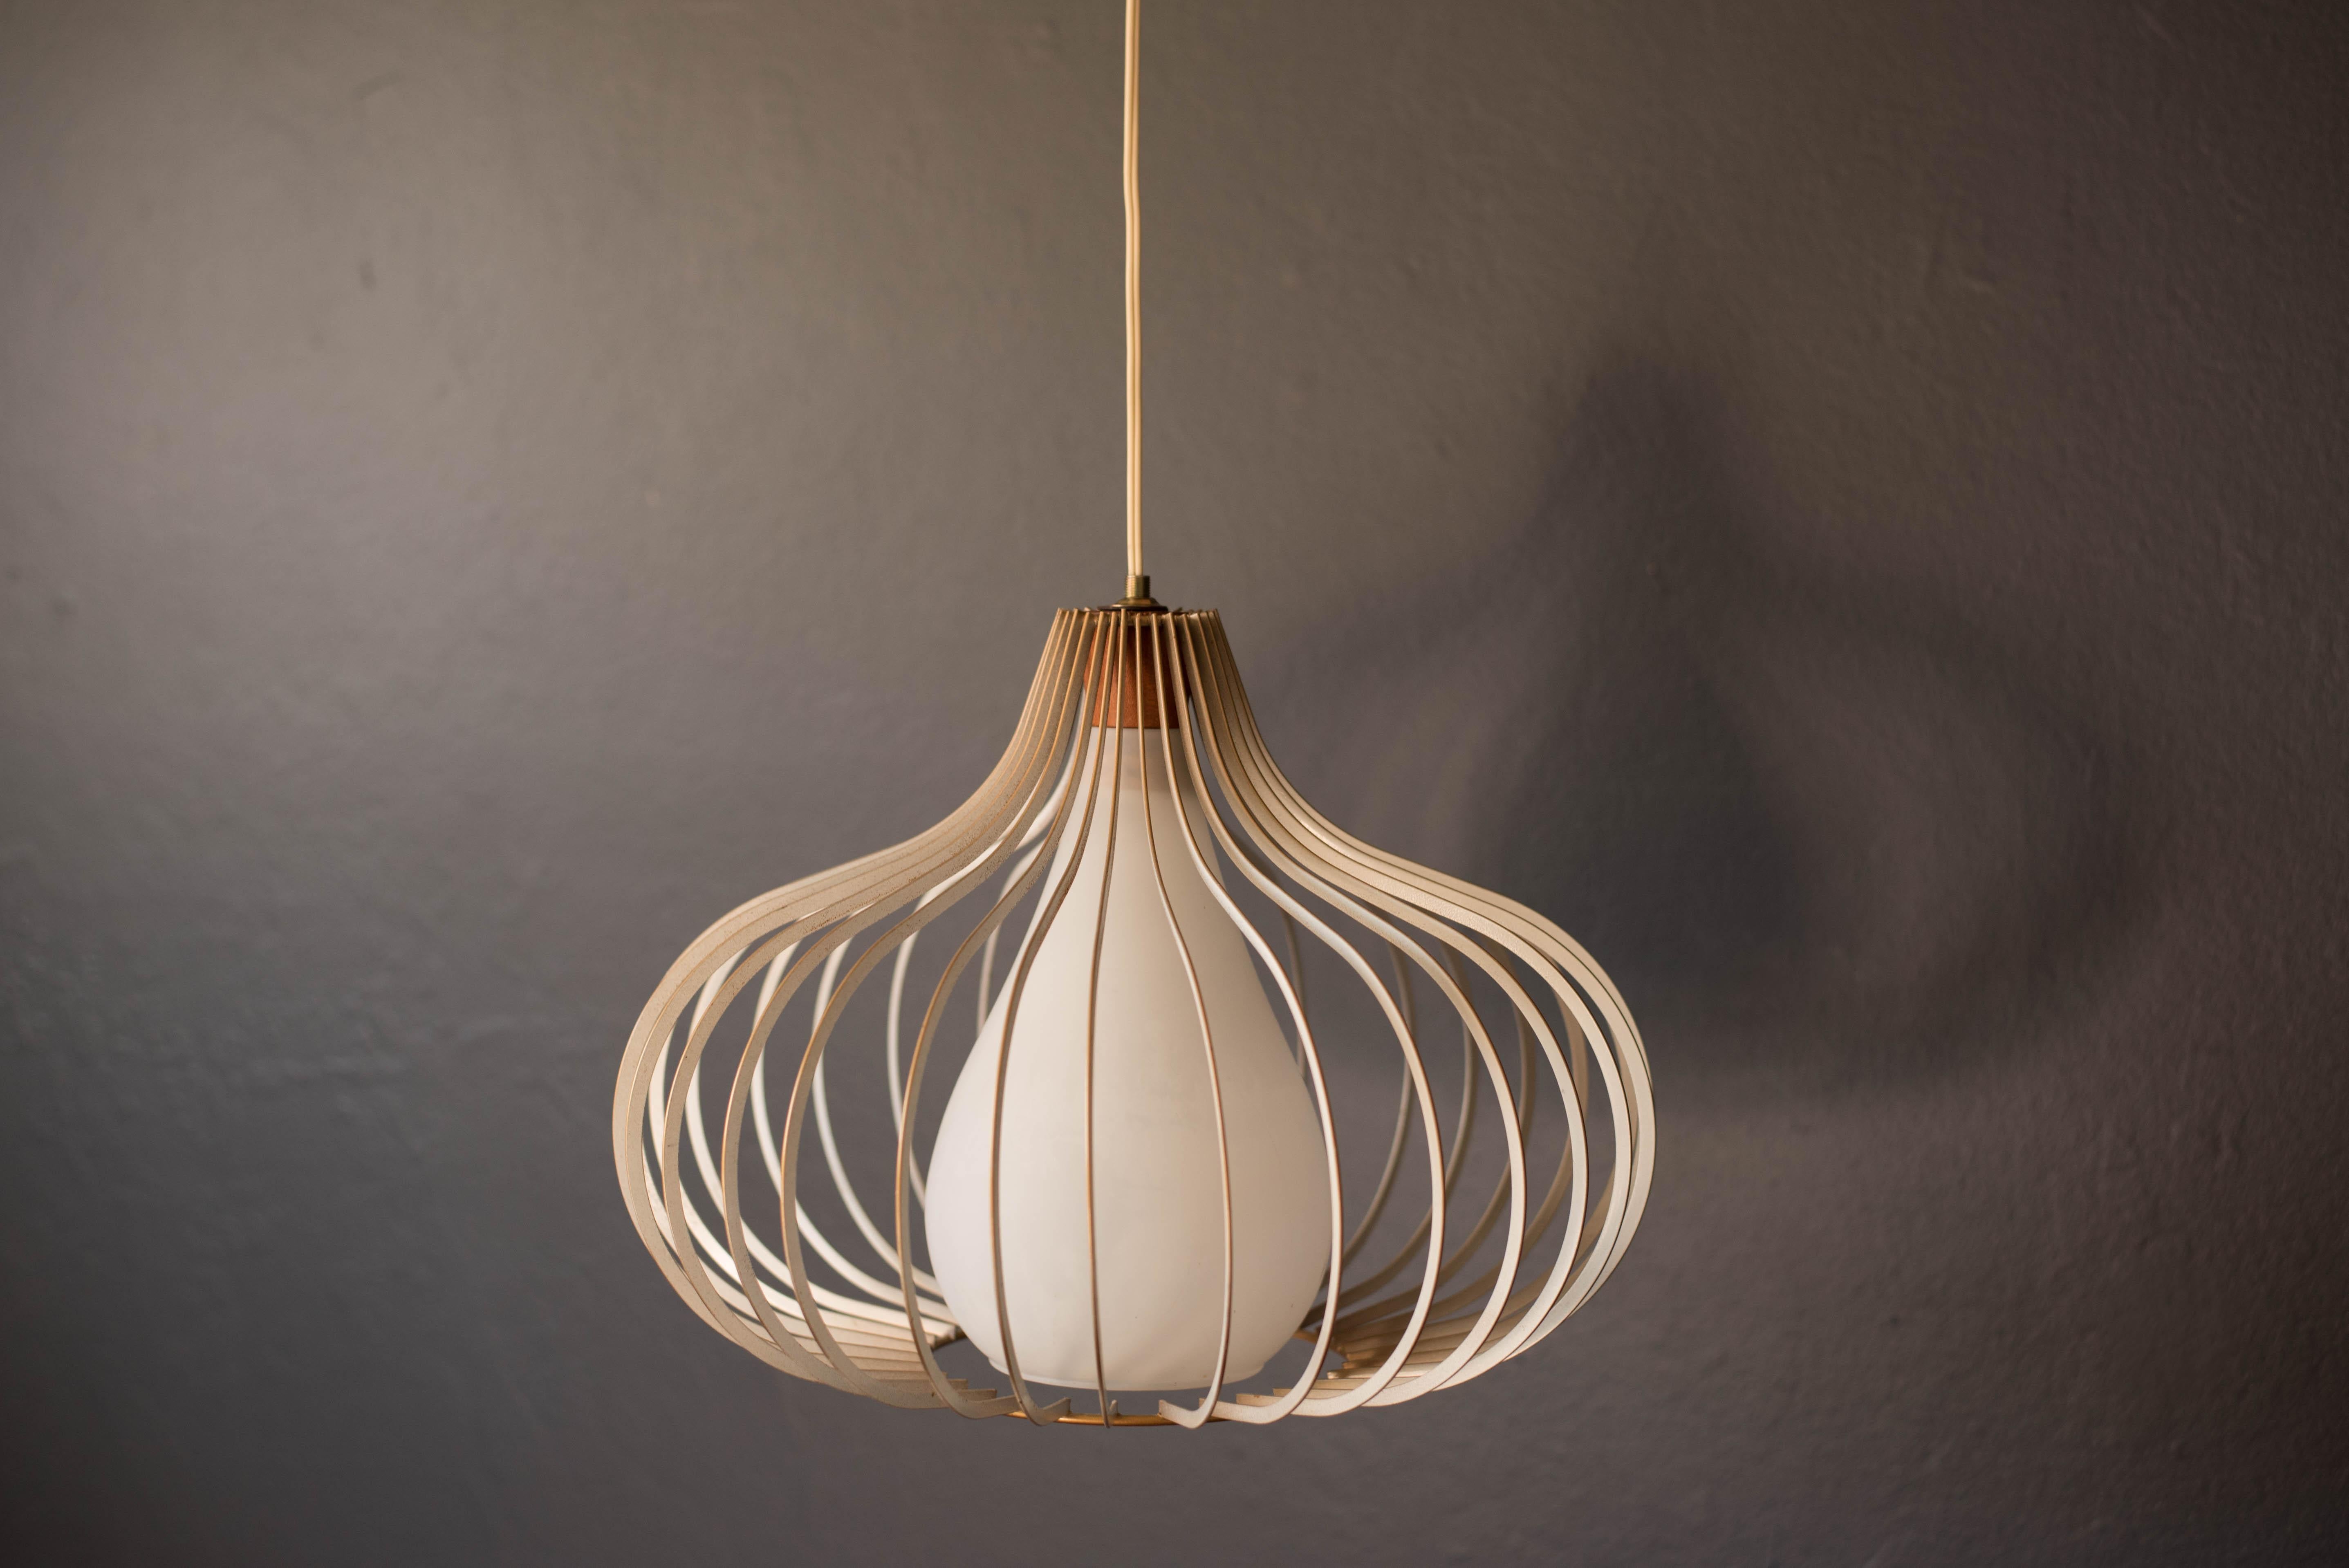 Vintage hanging wire pendant lamp circa 1960s. This piece has a frosted white teardrop glass pendant and walnut stem surrounded in a contoured metal frame.